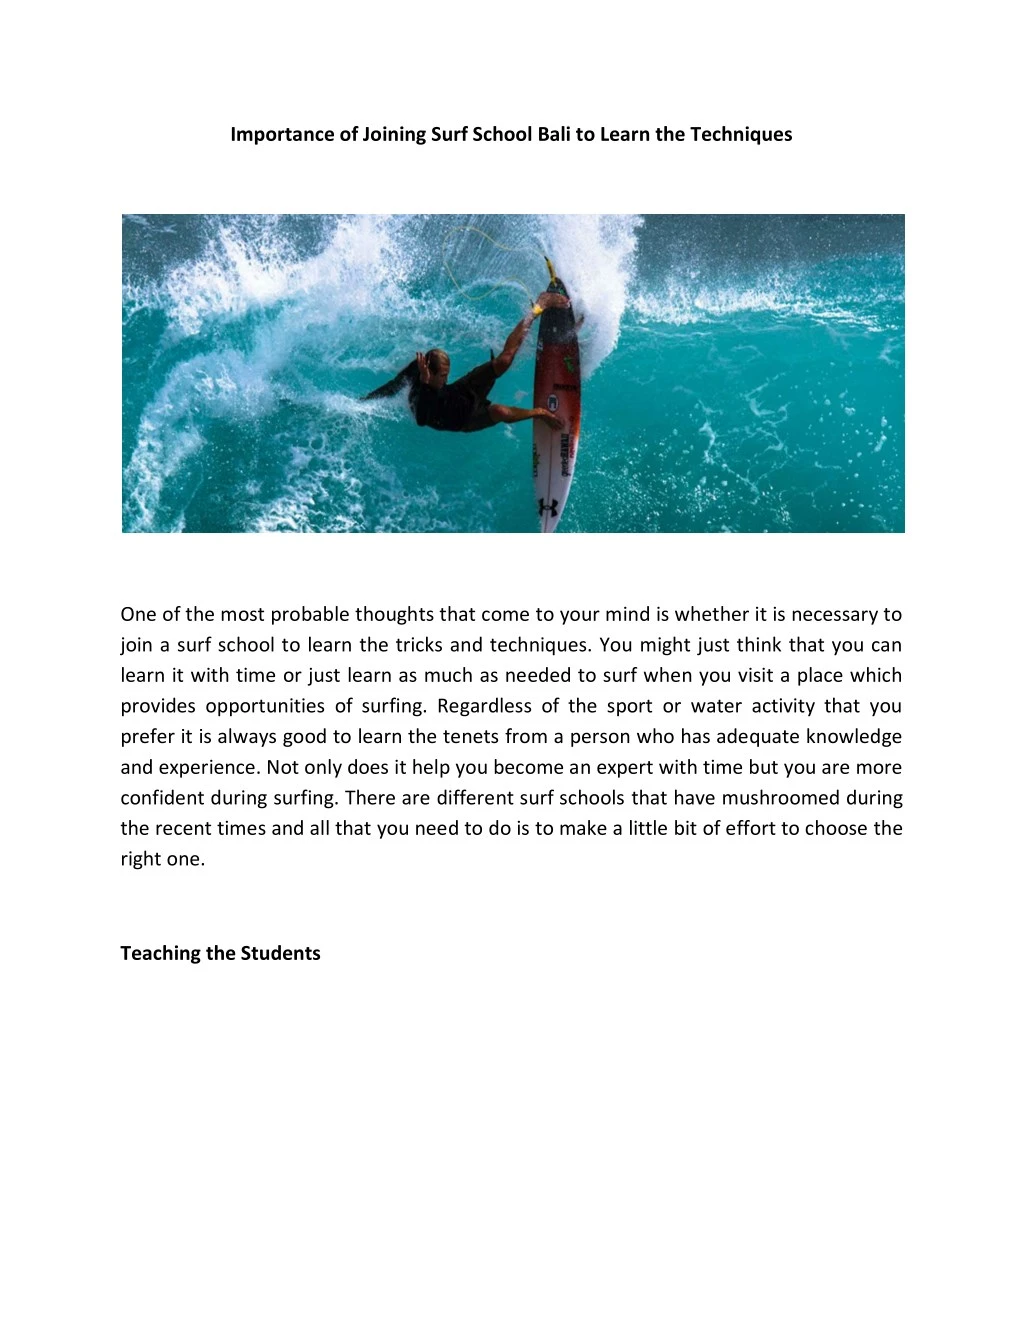 importance of joining surf school bali to learn